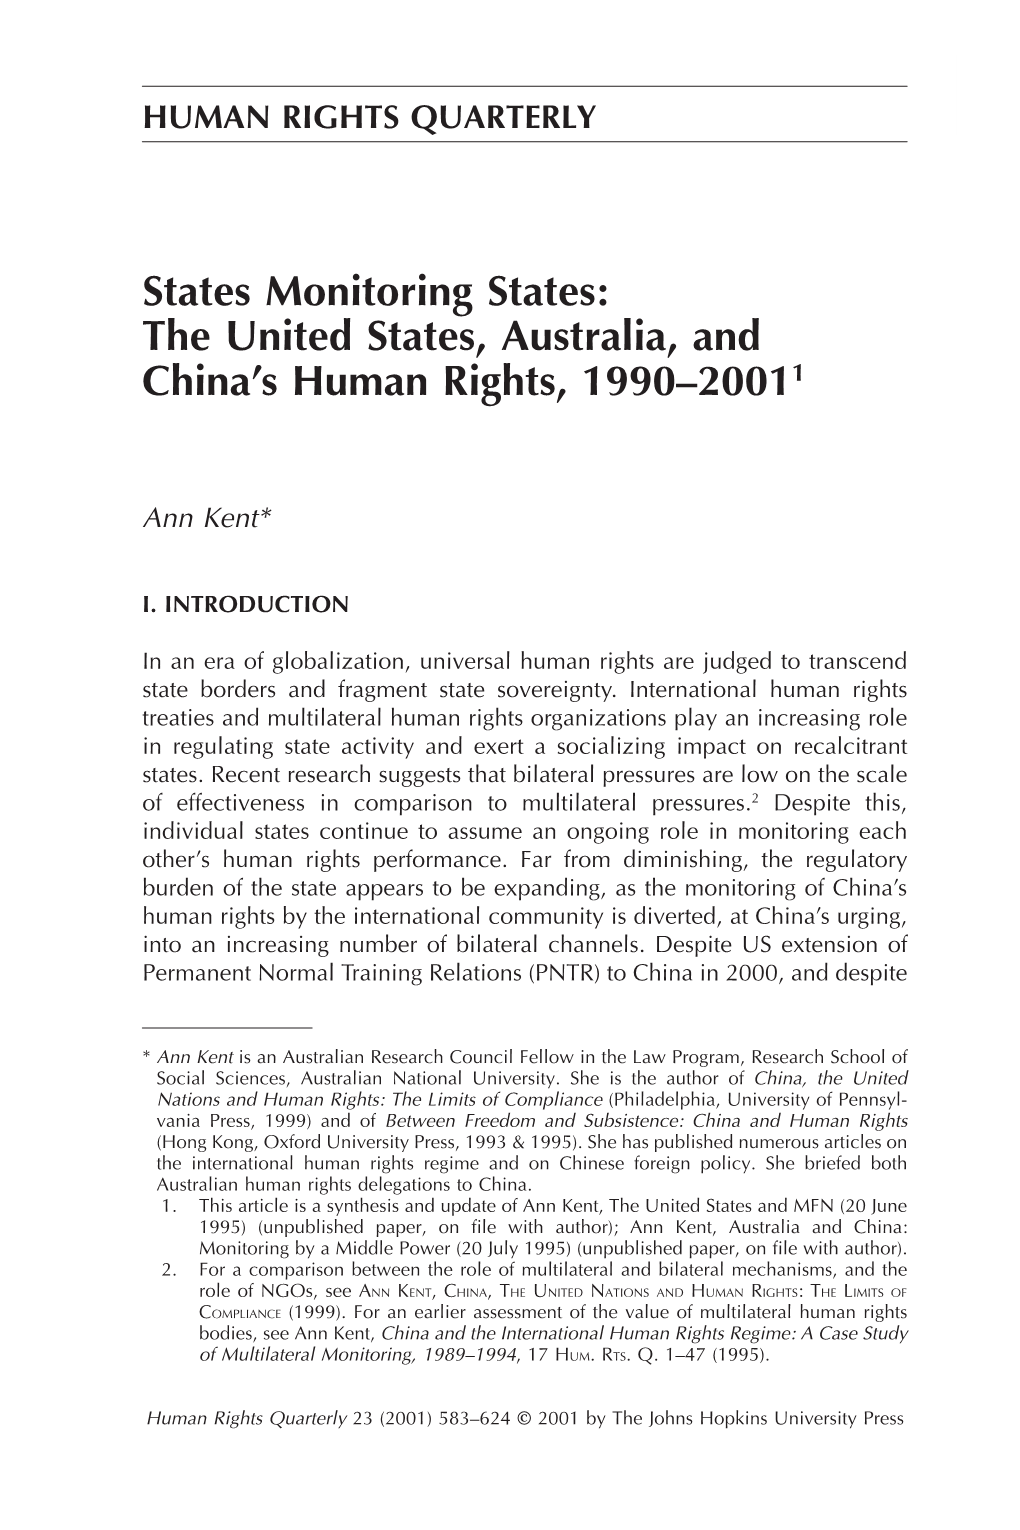 The United States, Australia, and China's Human Rights, 1990–20011